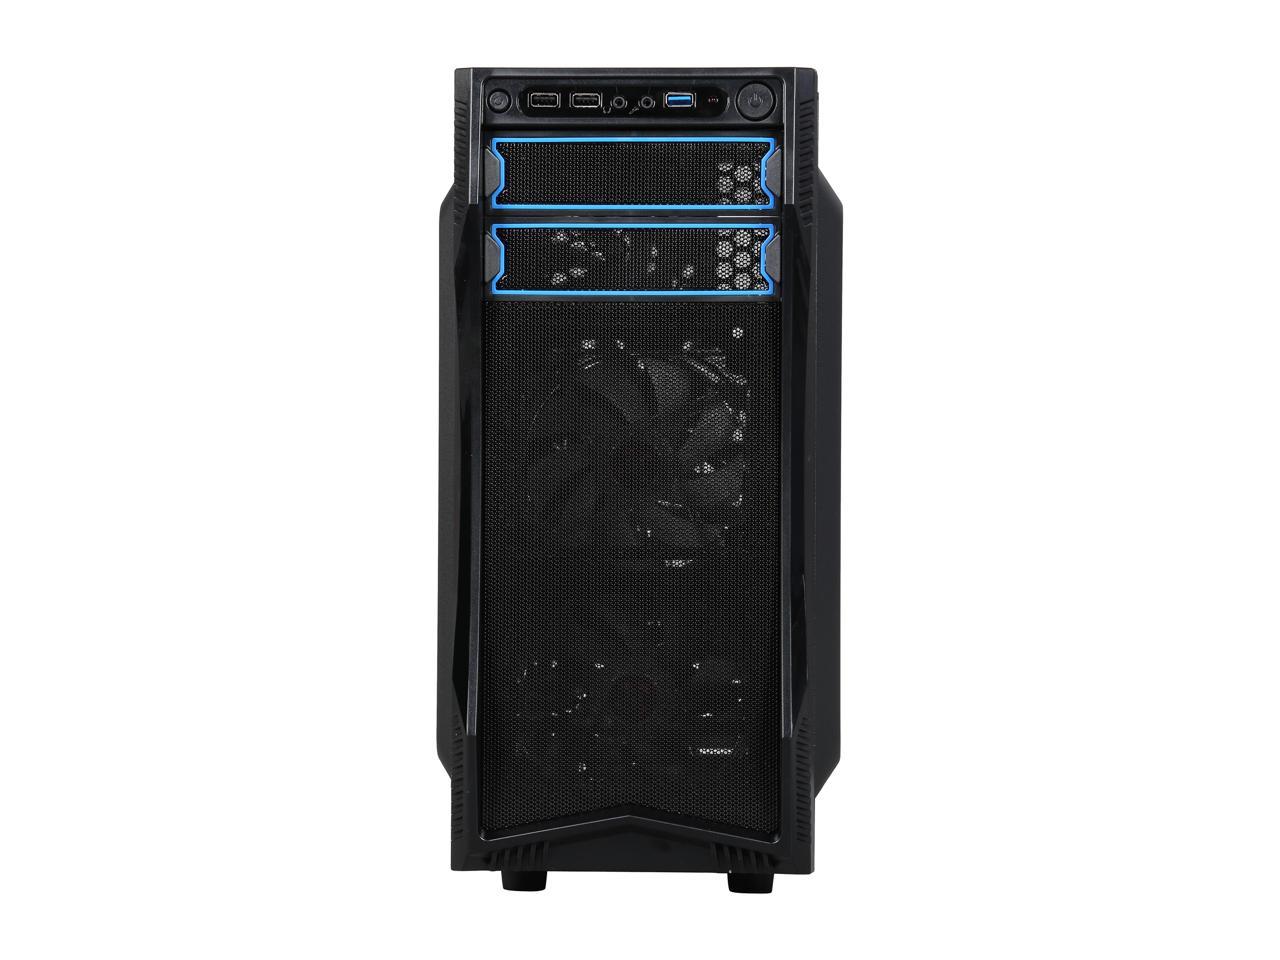 Rosewill ATX Mid Tower Gaming Computer Case, Latching Tool-less Design of Drive Bays, Support up to 5 Fans - CHALLENGER S